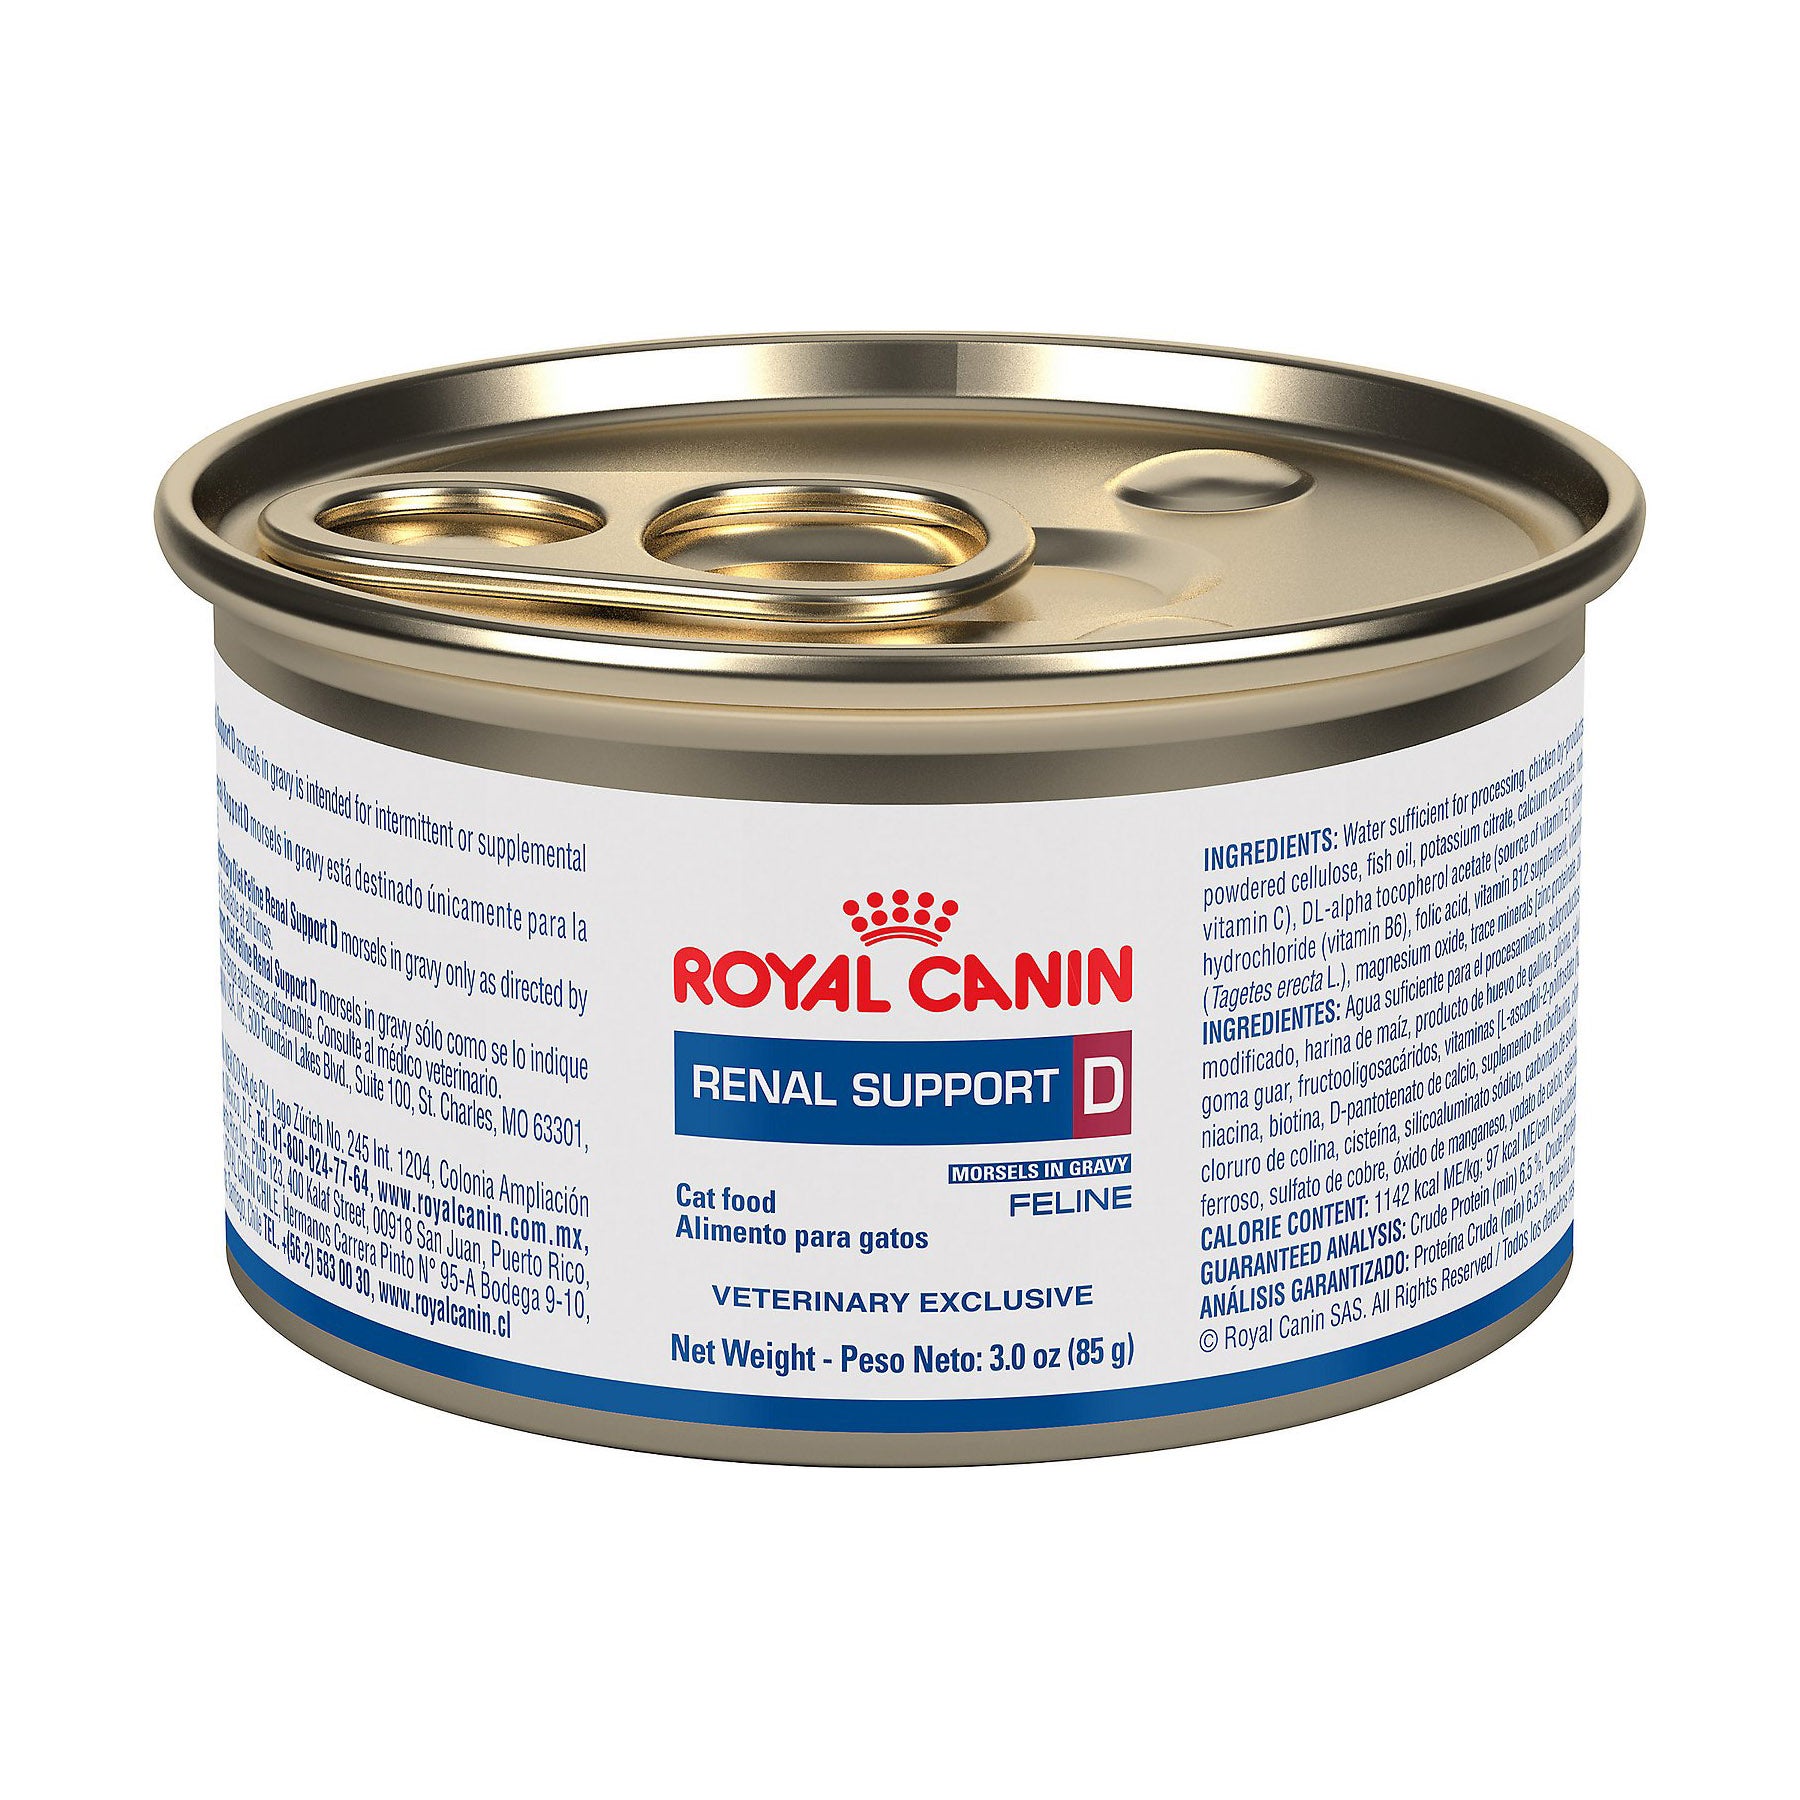 Pool Arthur Conan Doyle absorptie Royal Canin Veterinary Diet Feline Renal Support D Morsels in Gel | Free*  NJ Local Delivery | TheHungryPuppy.com